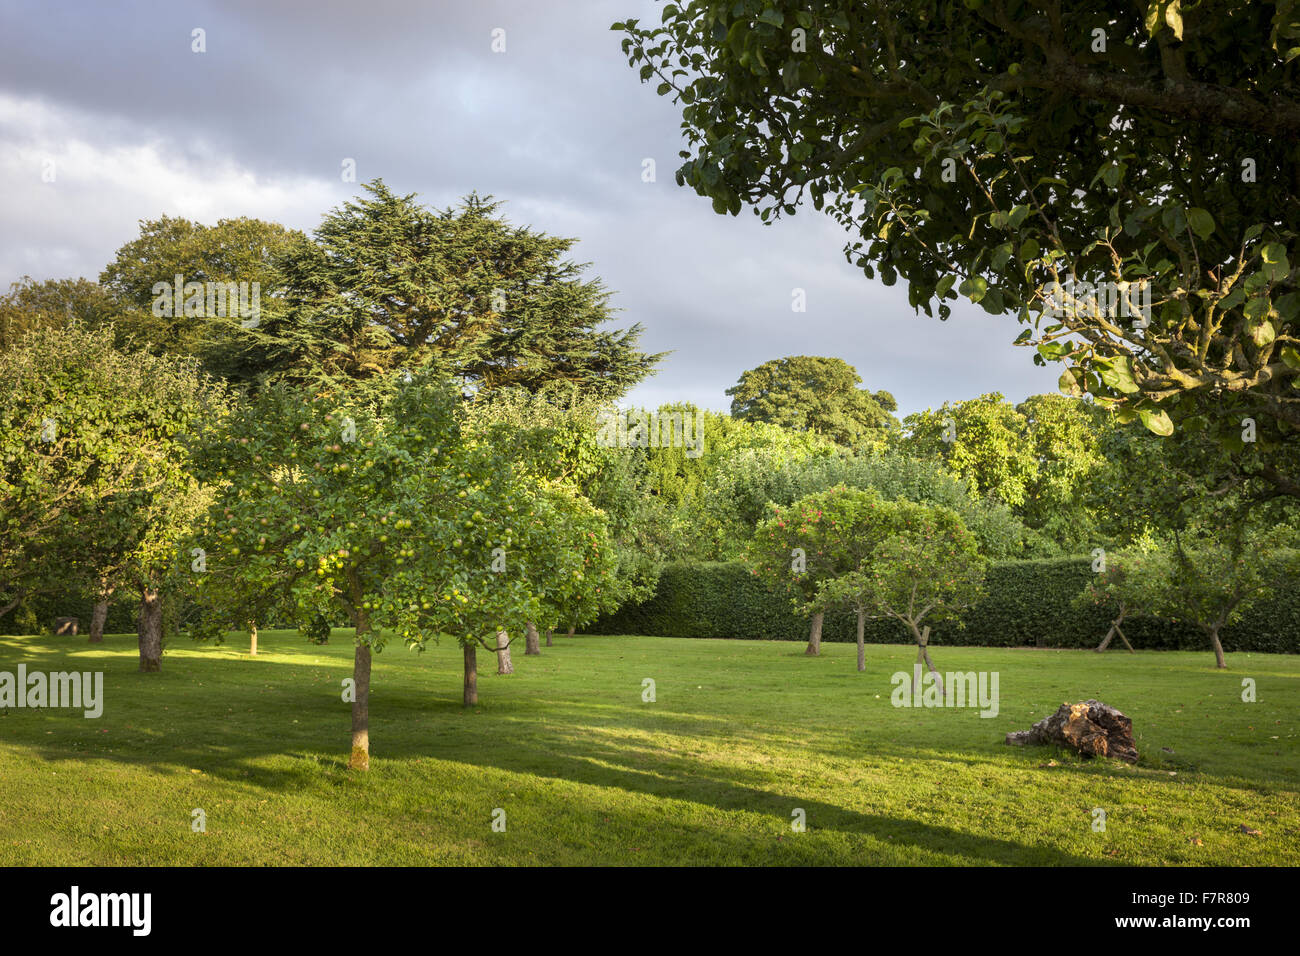 The Fruiting Orchard at Hardwick Hall, Derbyshire. The Hardwick Estate is made up of stunning houses and beautiful landscapes. Stock Photo